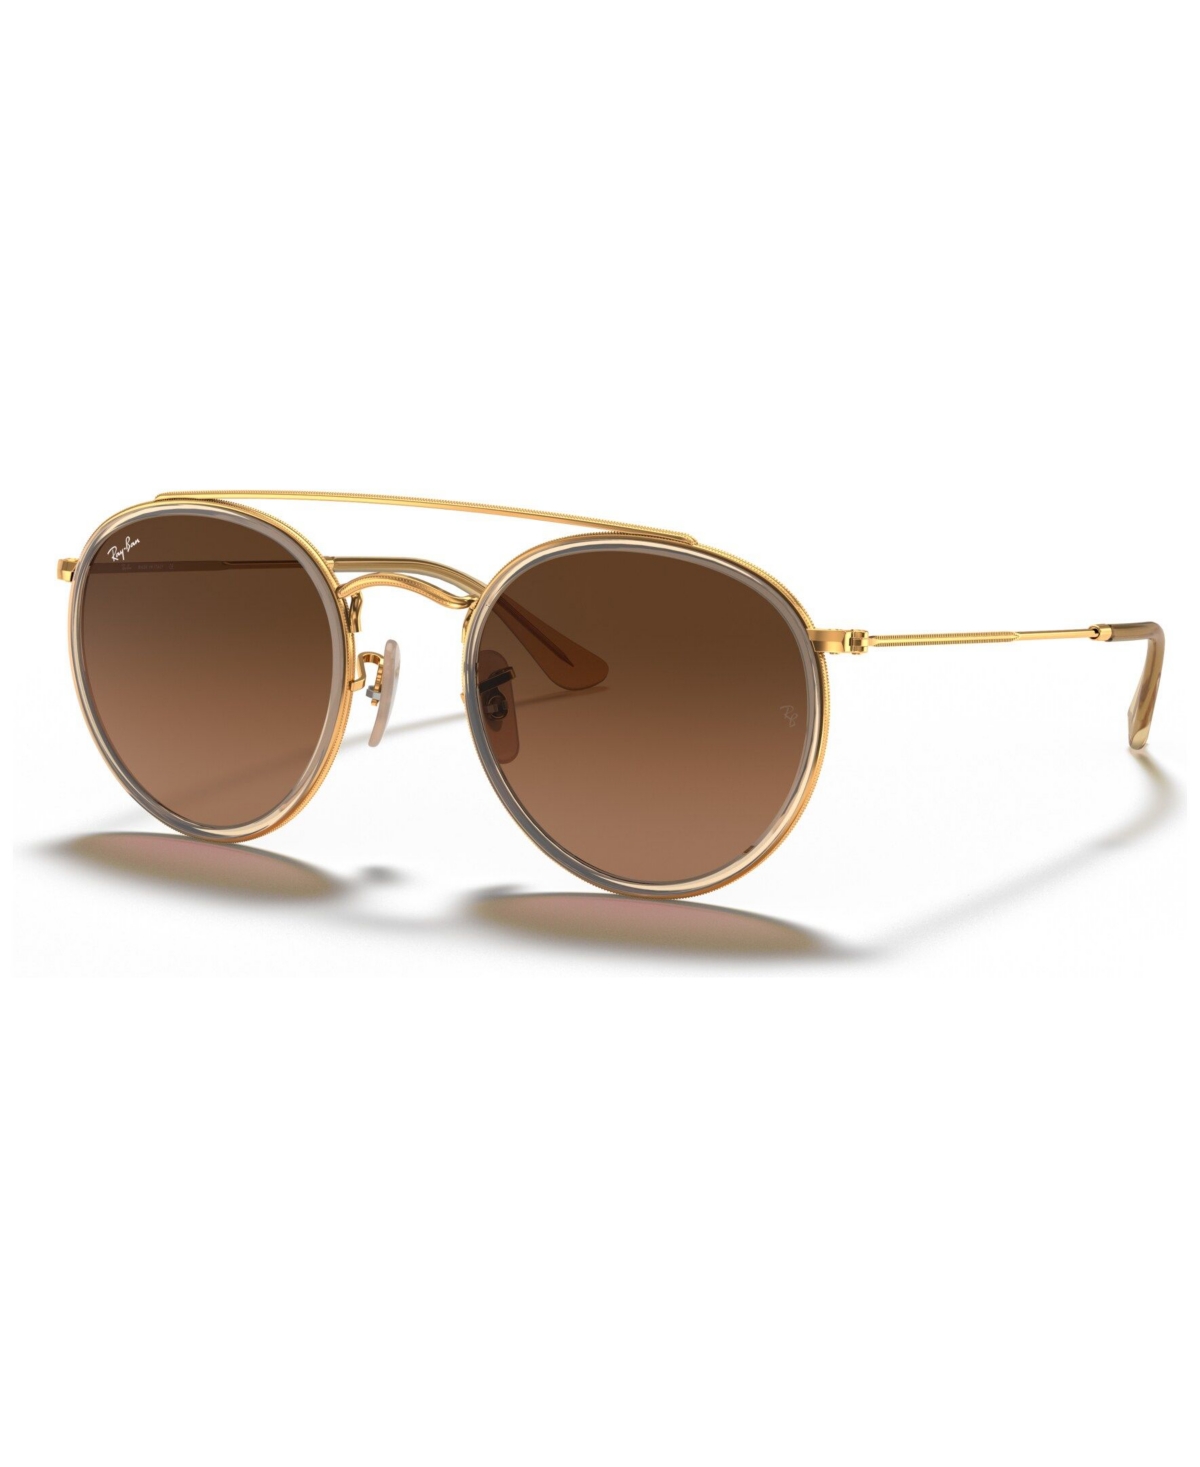 Ray Ban Sunglasses, Rb3647n Round Double Bridge In Gold,brown Gradient Grey